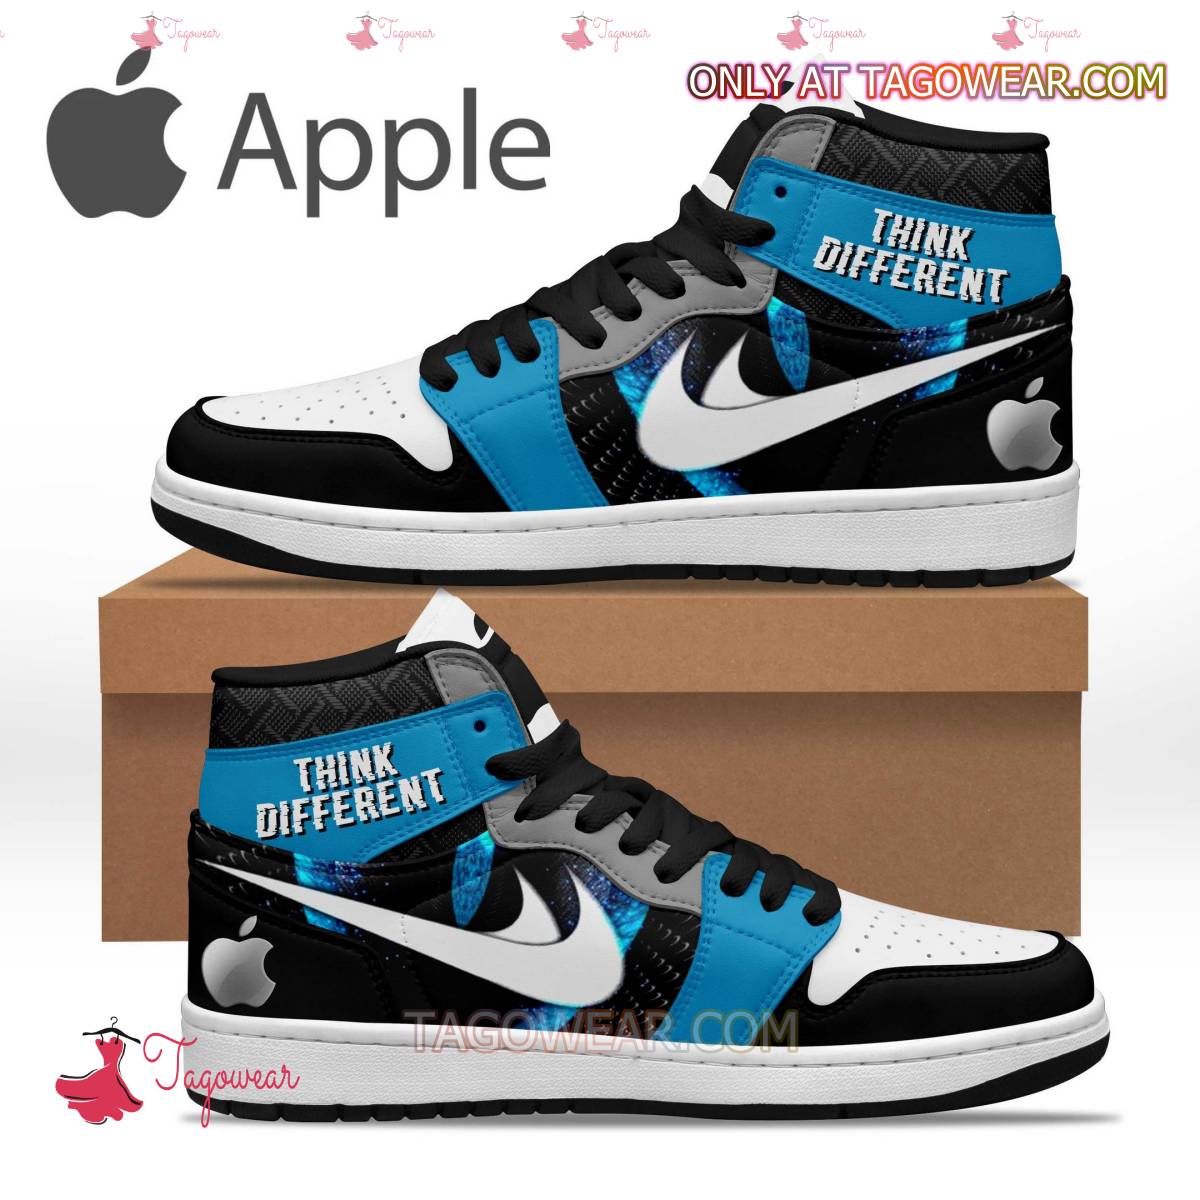 Apple Think Different Air Jordan High Top Shoes